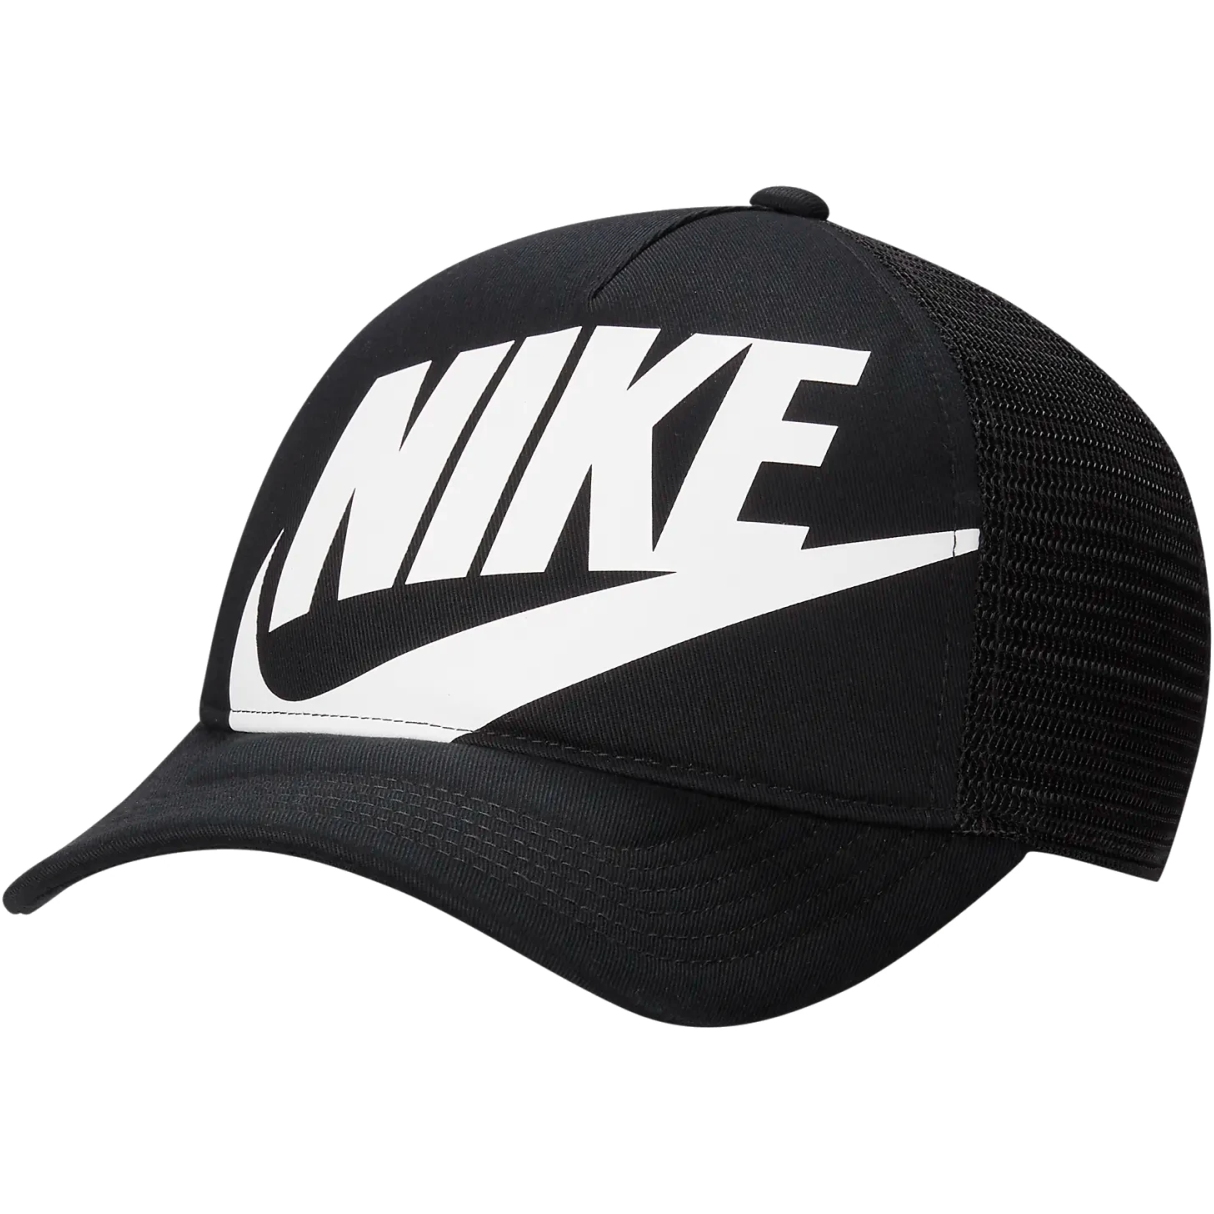 Picture of Nike Rise Structured Trucker Cap Kids - black/white FB5363-010